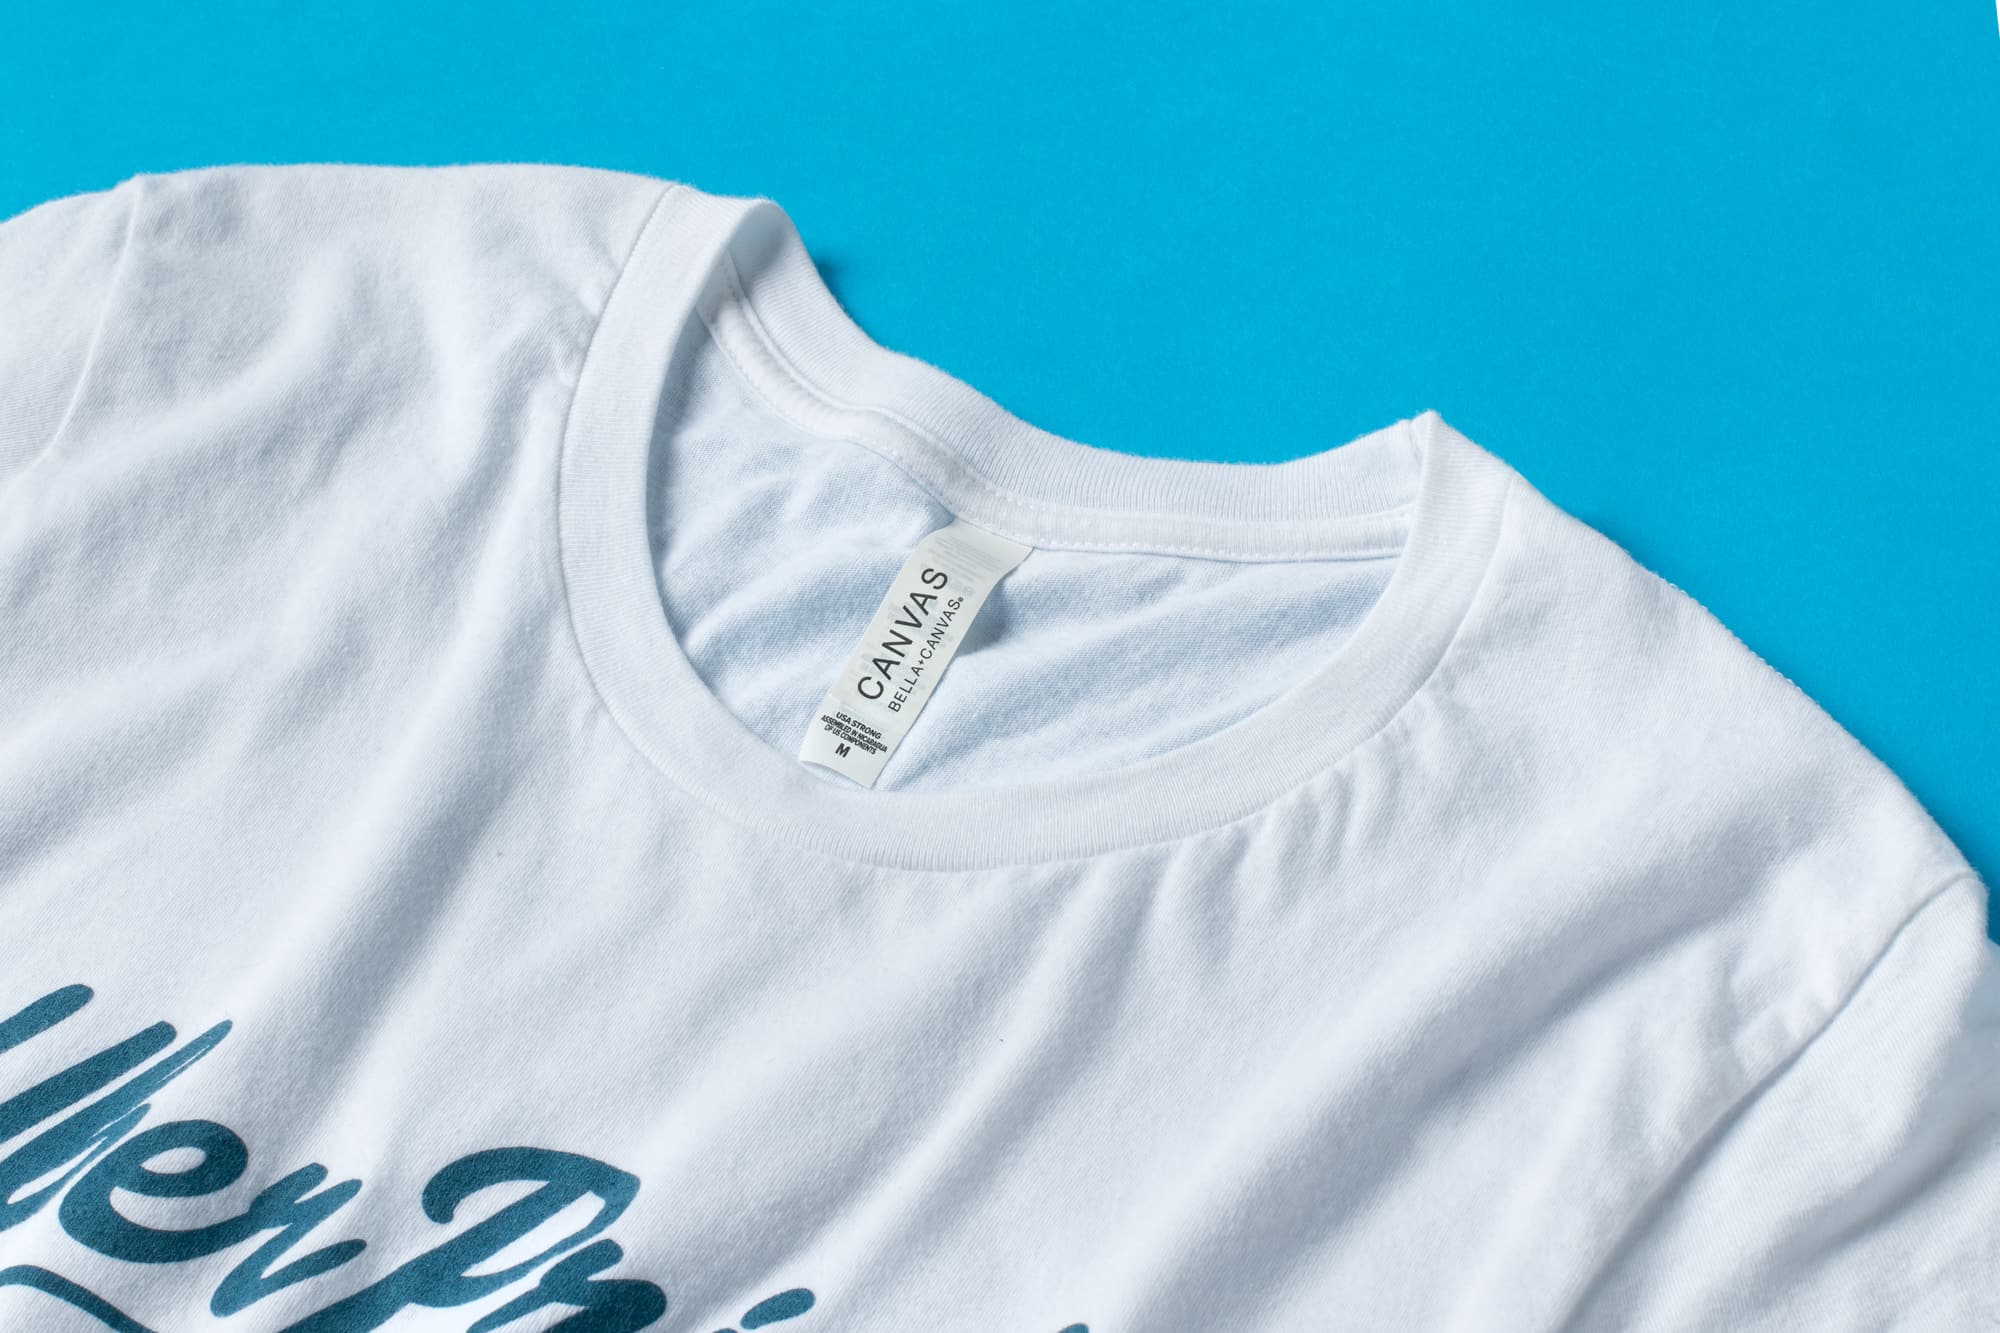 A detail view of the Premium Tee's collar and tag to show material